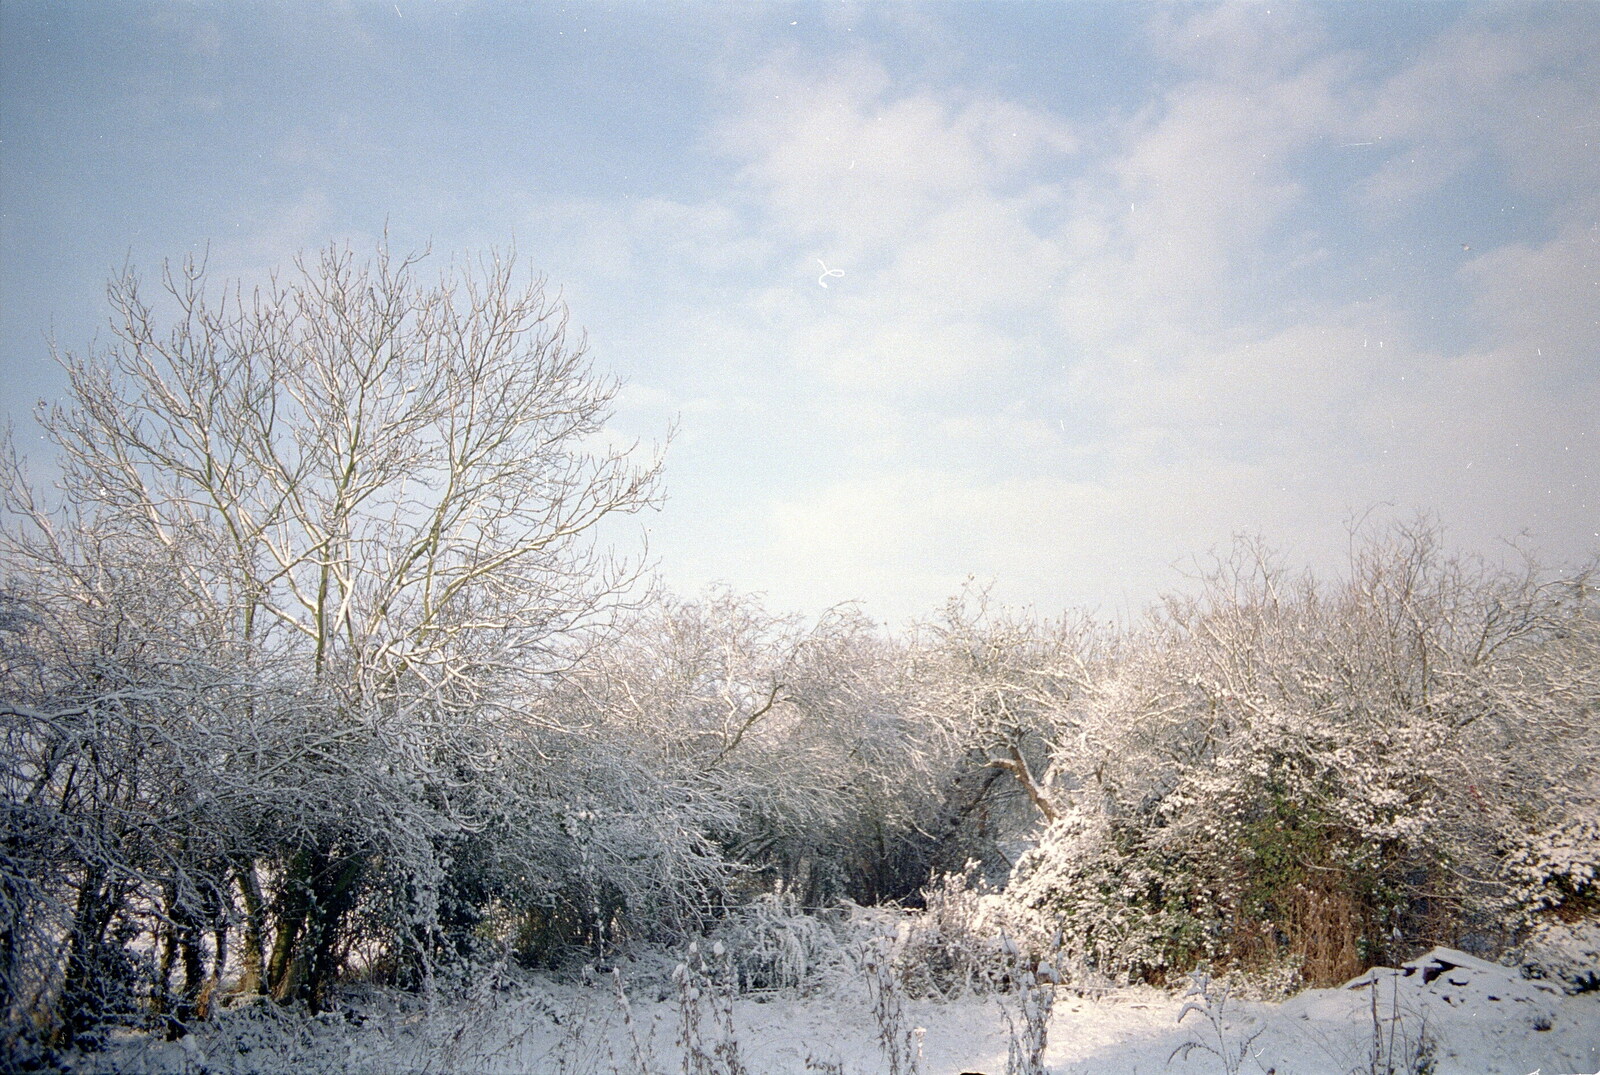 The trees are covered in snow from New Year's Eve at the Swan Inn, Brome, Suffolk - 31st December 1994